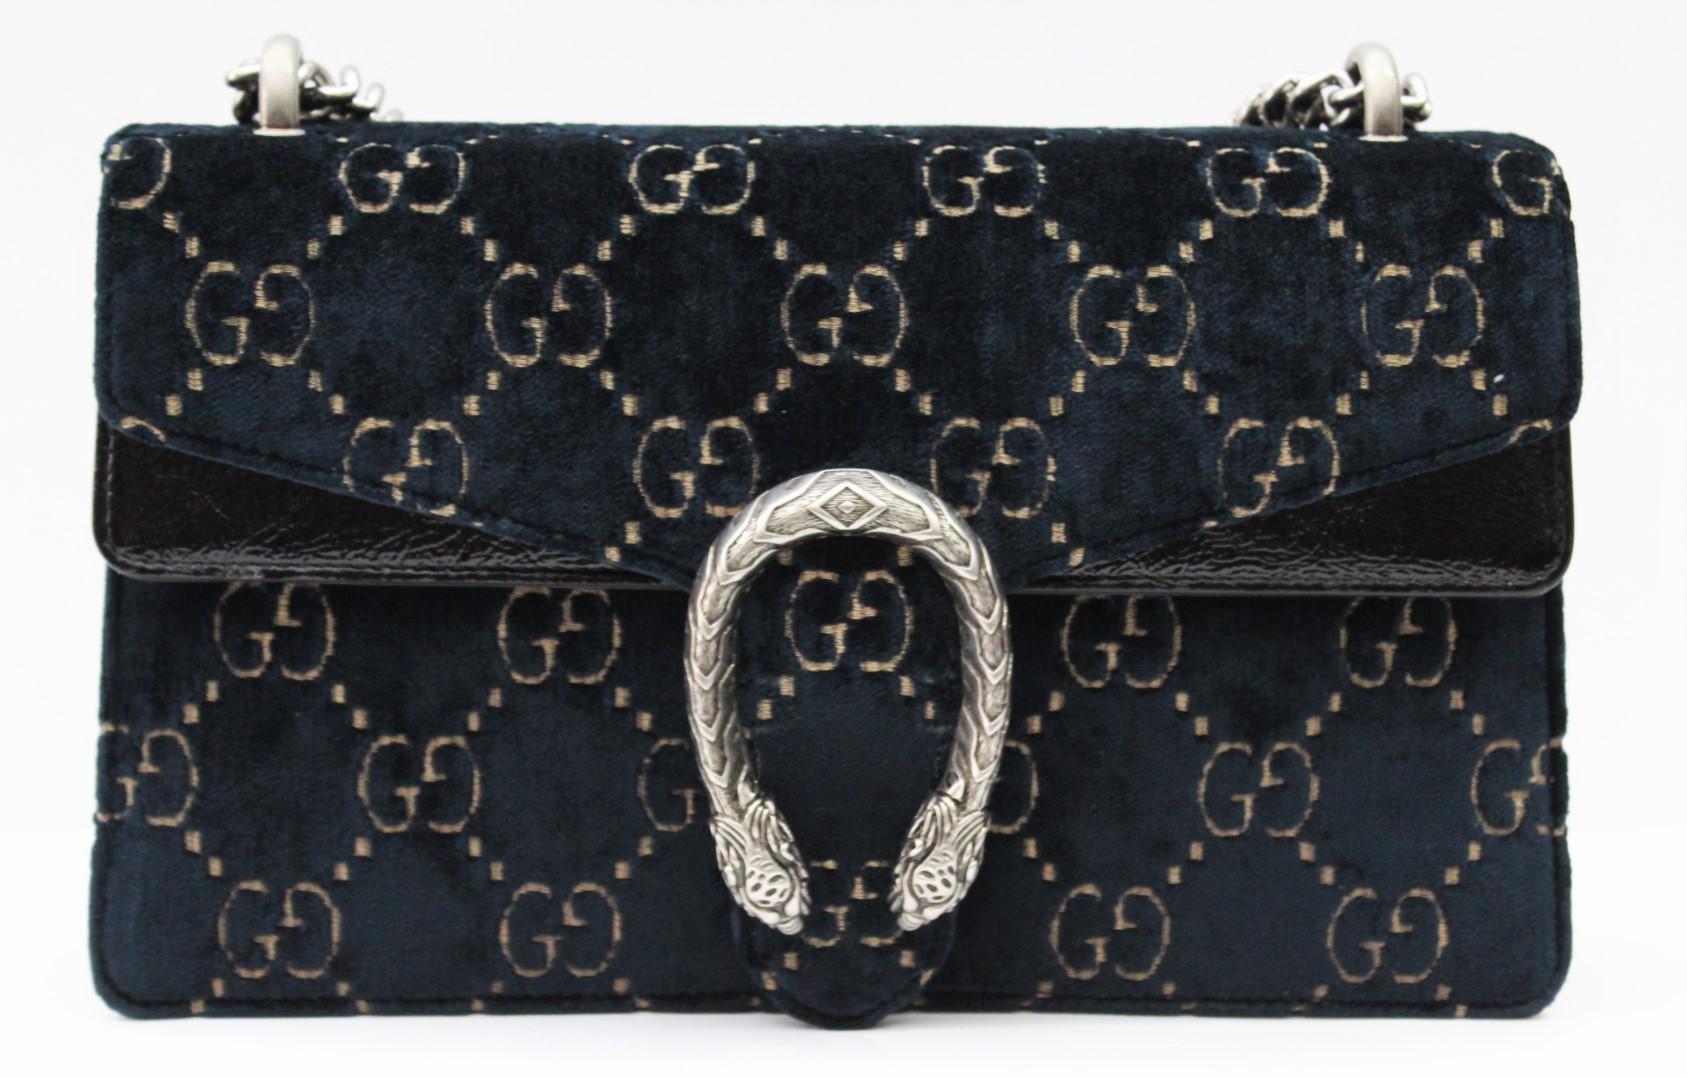 Gucci Dionysus bag 
Blue and beige GG velvet with black patent leather trim
Antique silver-colored finishes
Closing with pin and lateral safety system
Hand painted edges
Internal compartment with zip
Pocket under the flap

The sliding chain shoulder